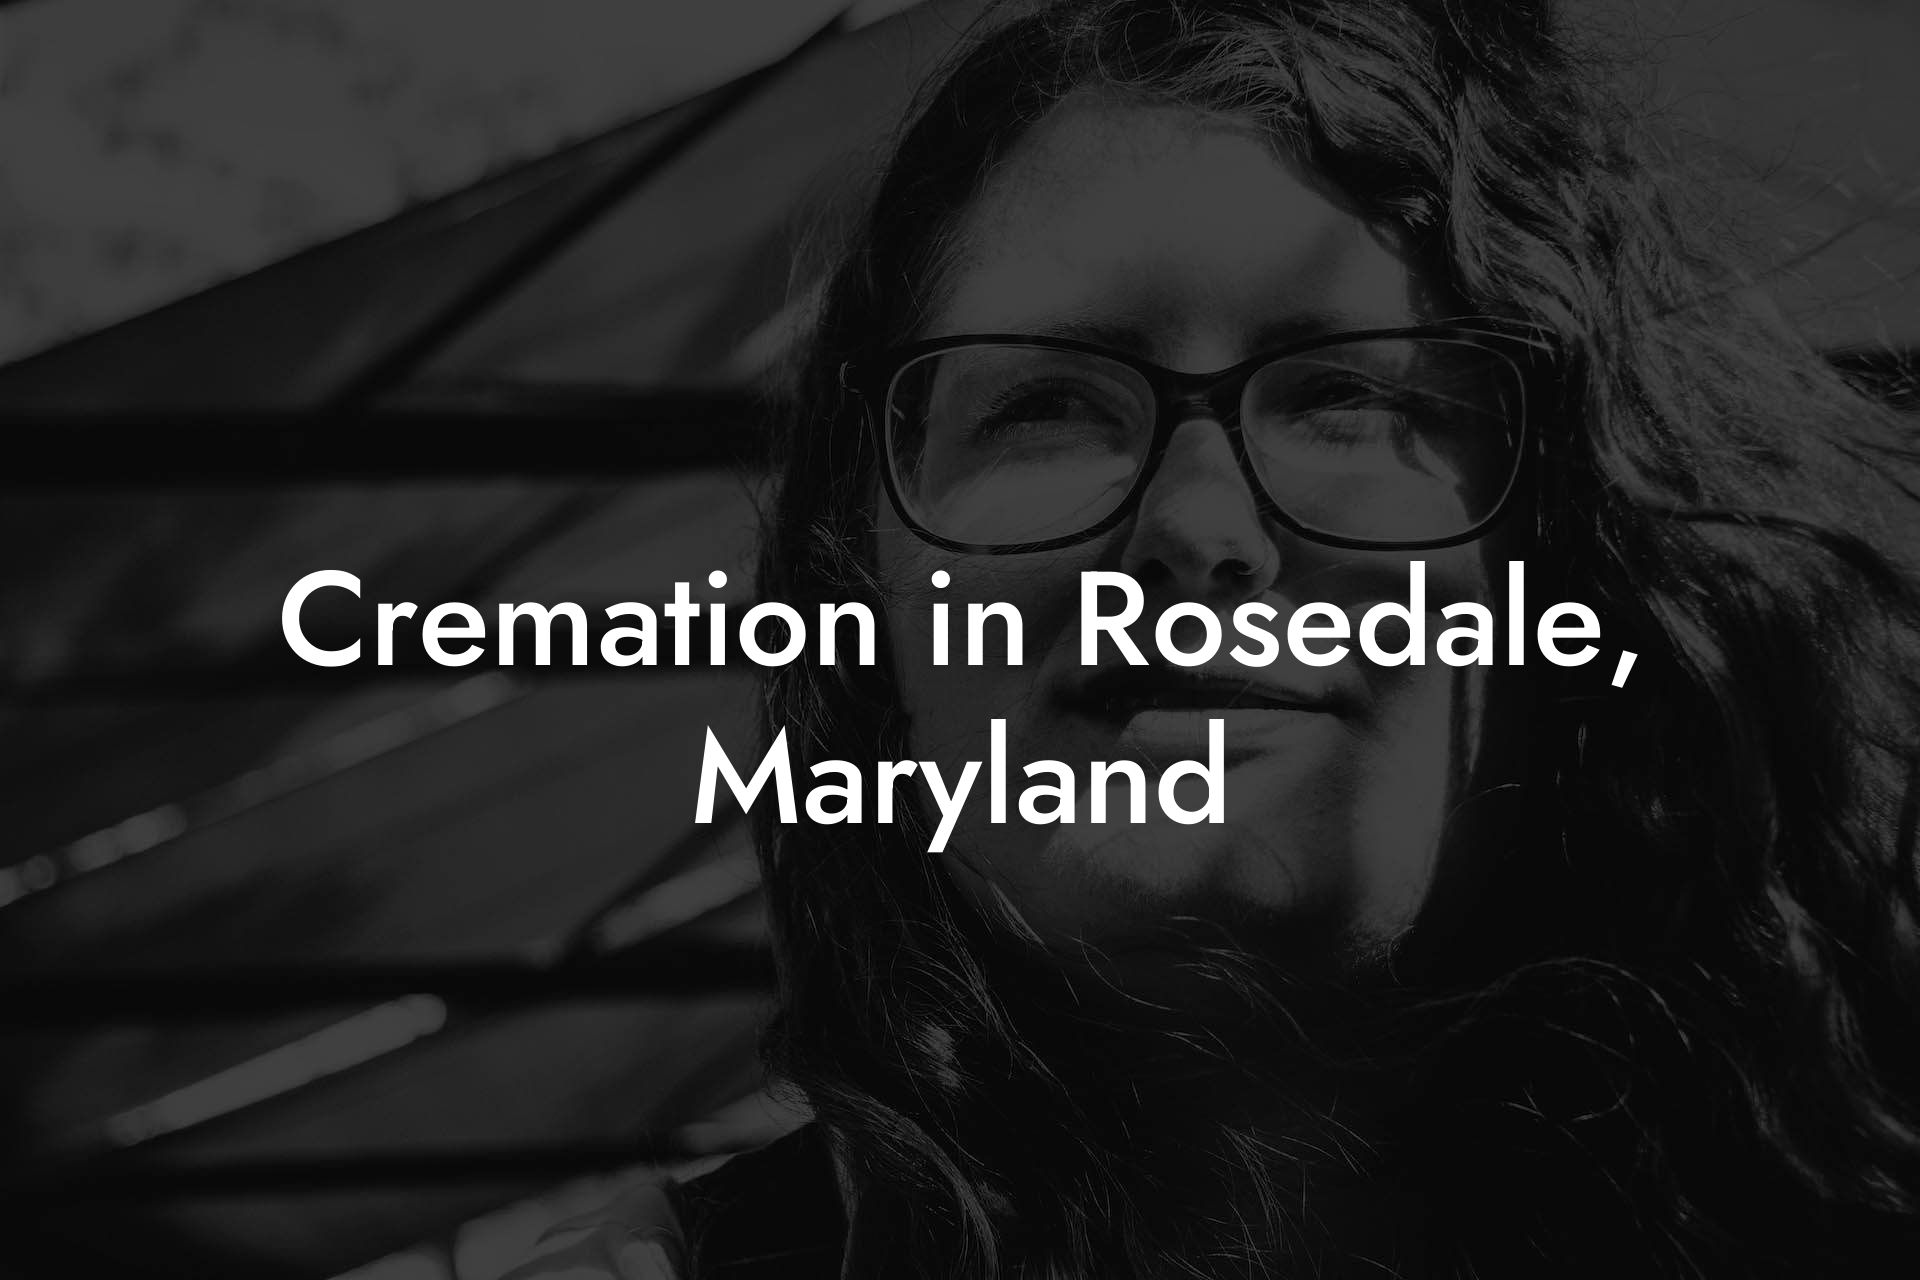 Cremation in Rosedale, Maryland